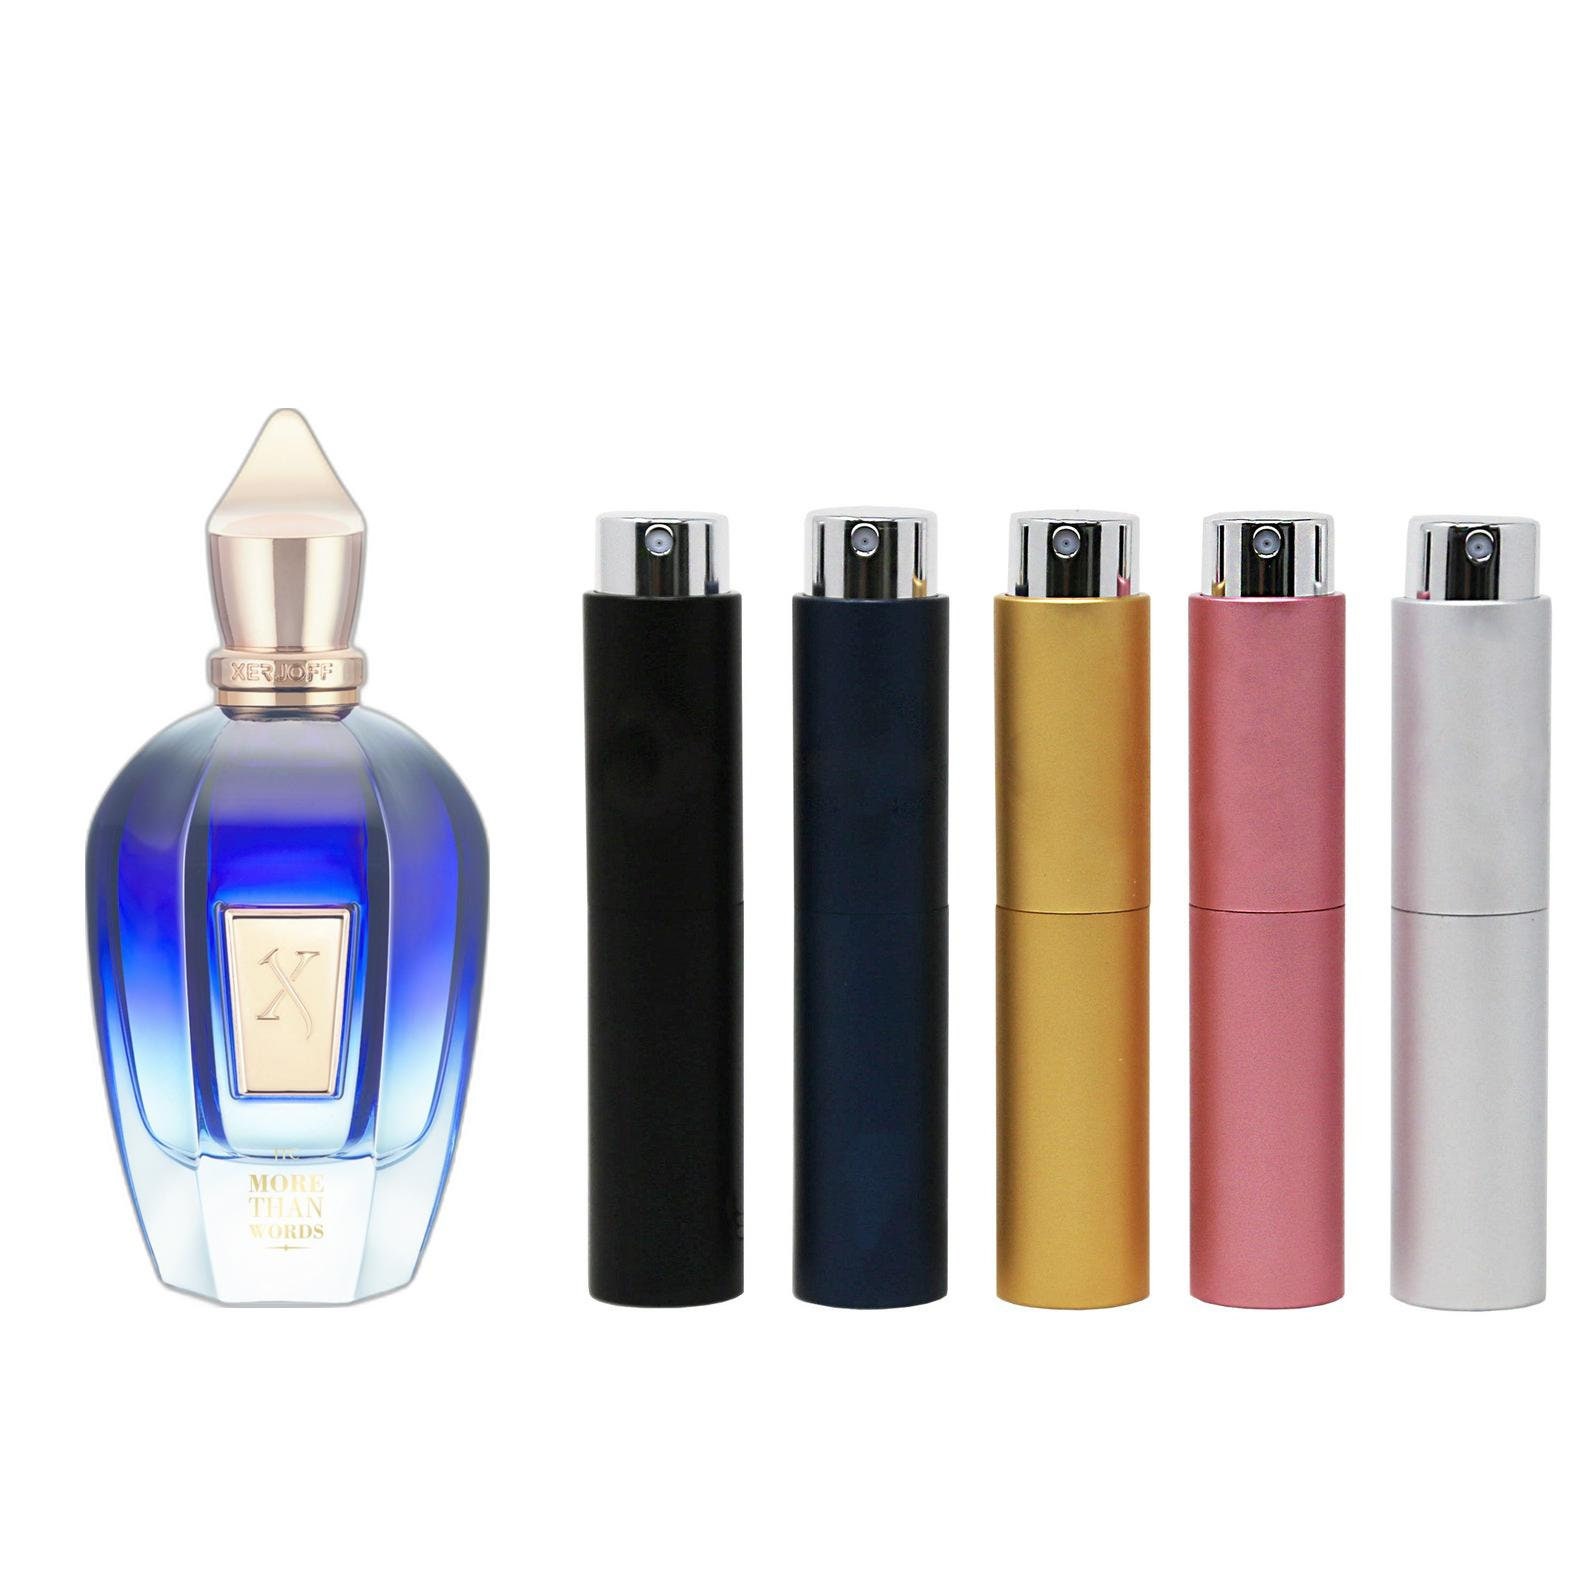 More Than Words Xerjoff perfume - a fragrance for women and men 2012